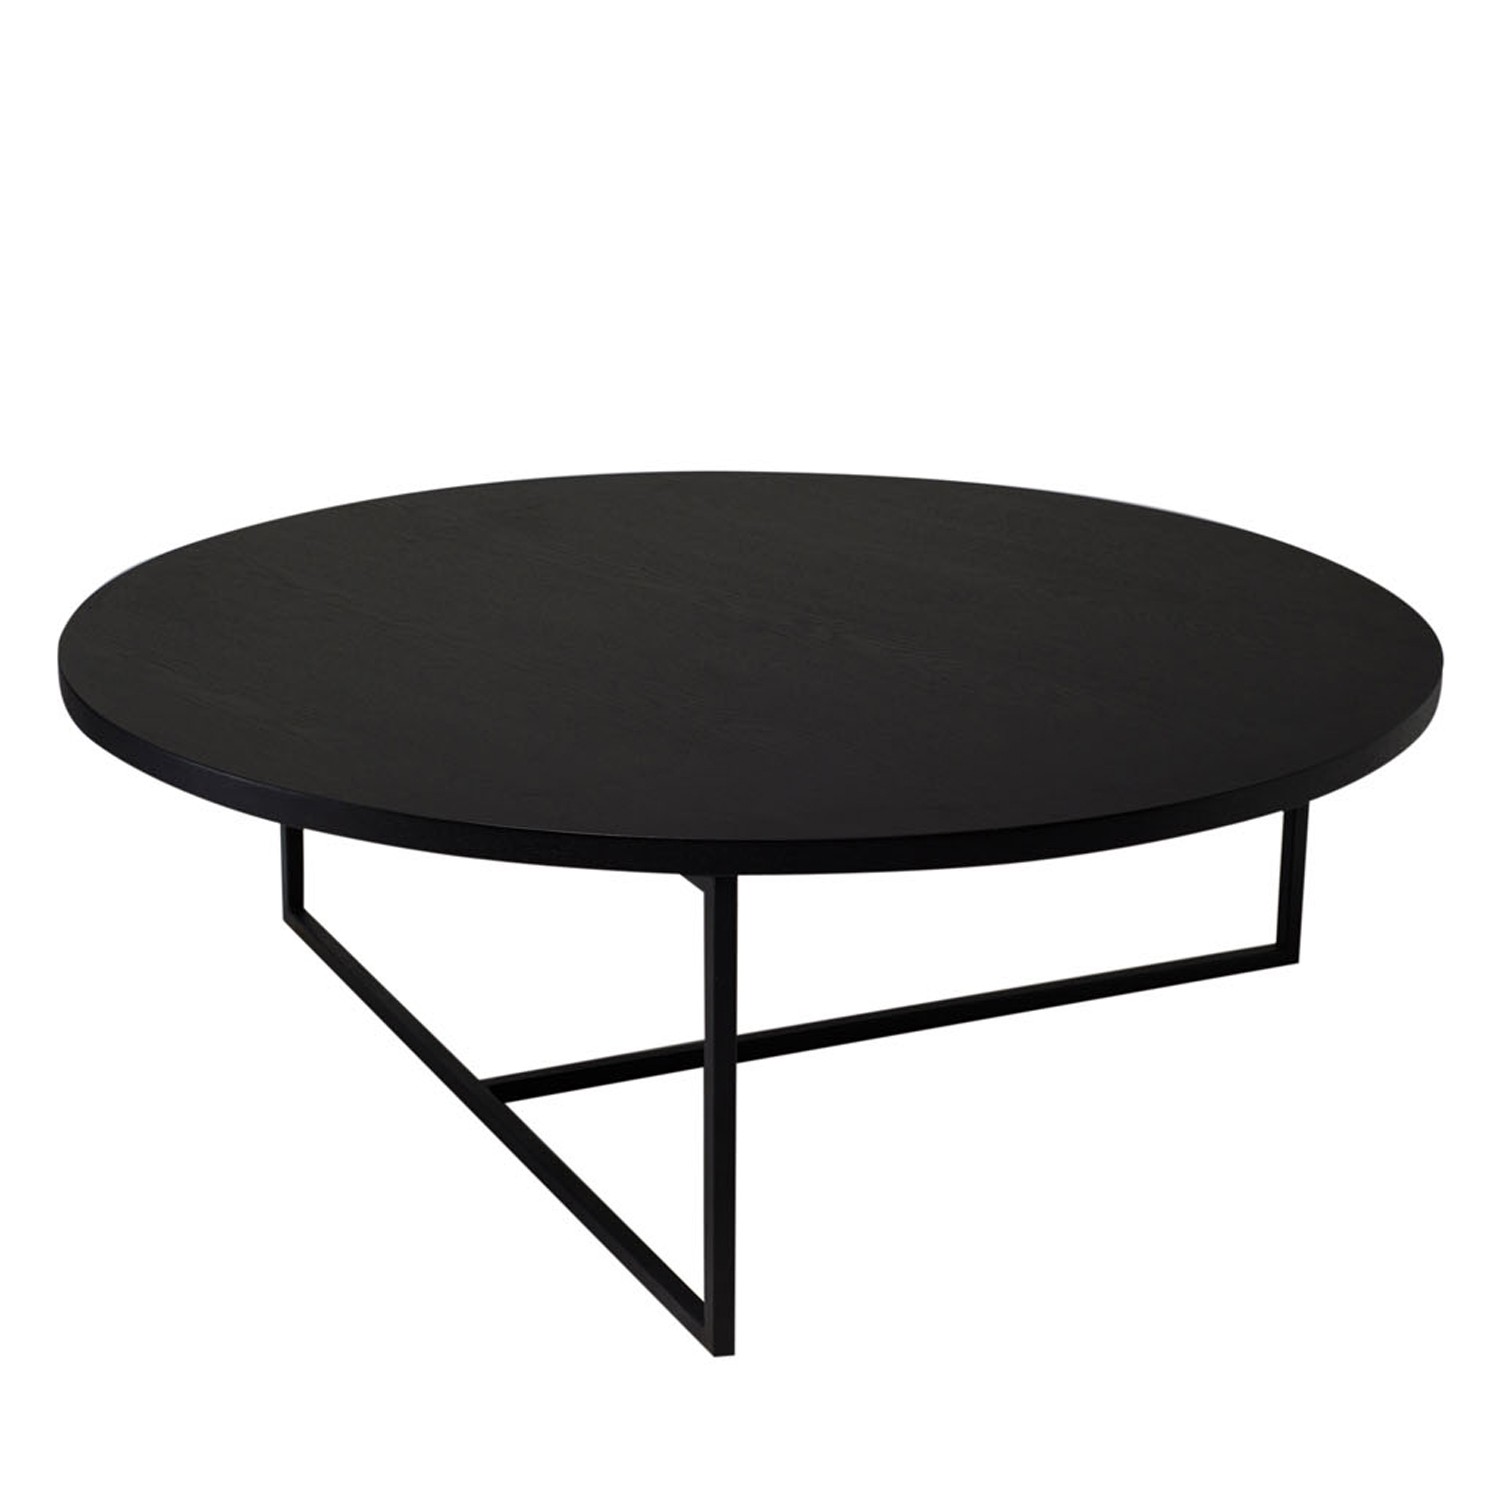 modern table runner probably terrific real black side tables using inexpensive coffee for charming living room kmart end and sets accent glass ikea console big large wooden chest